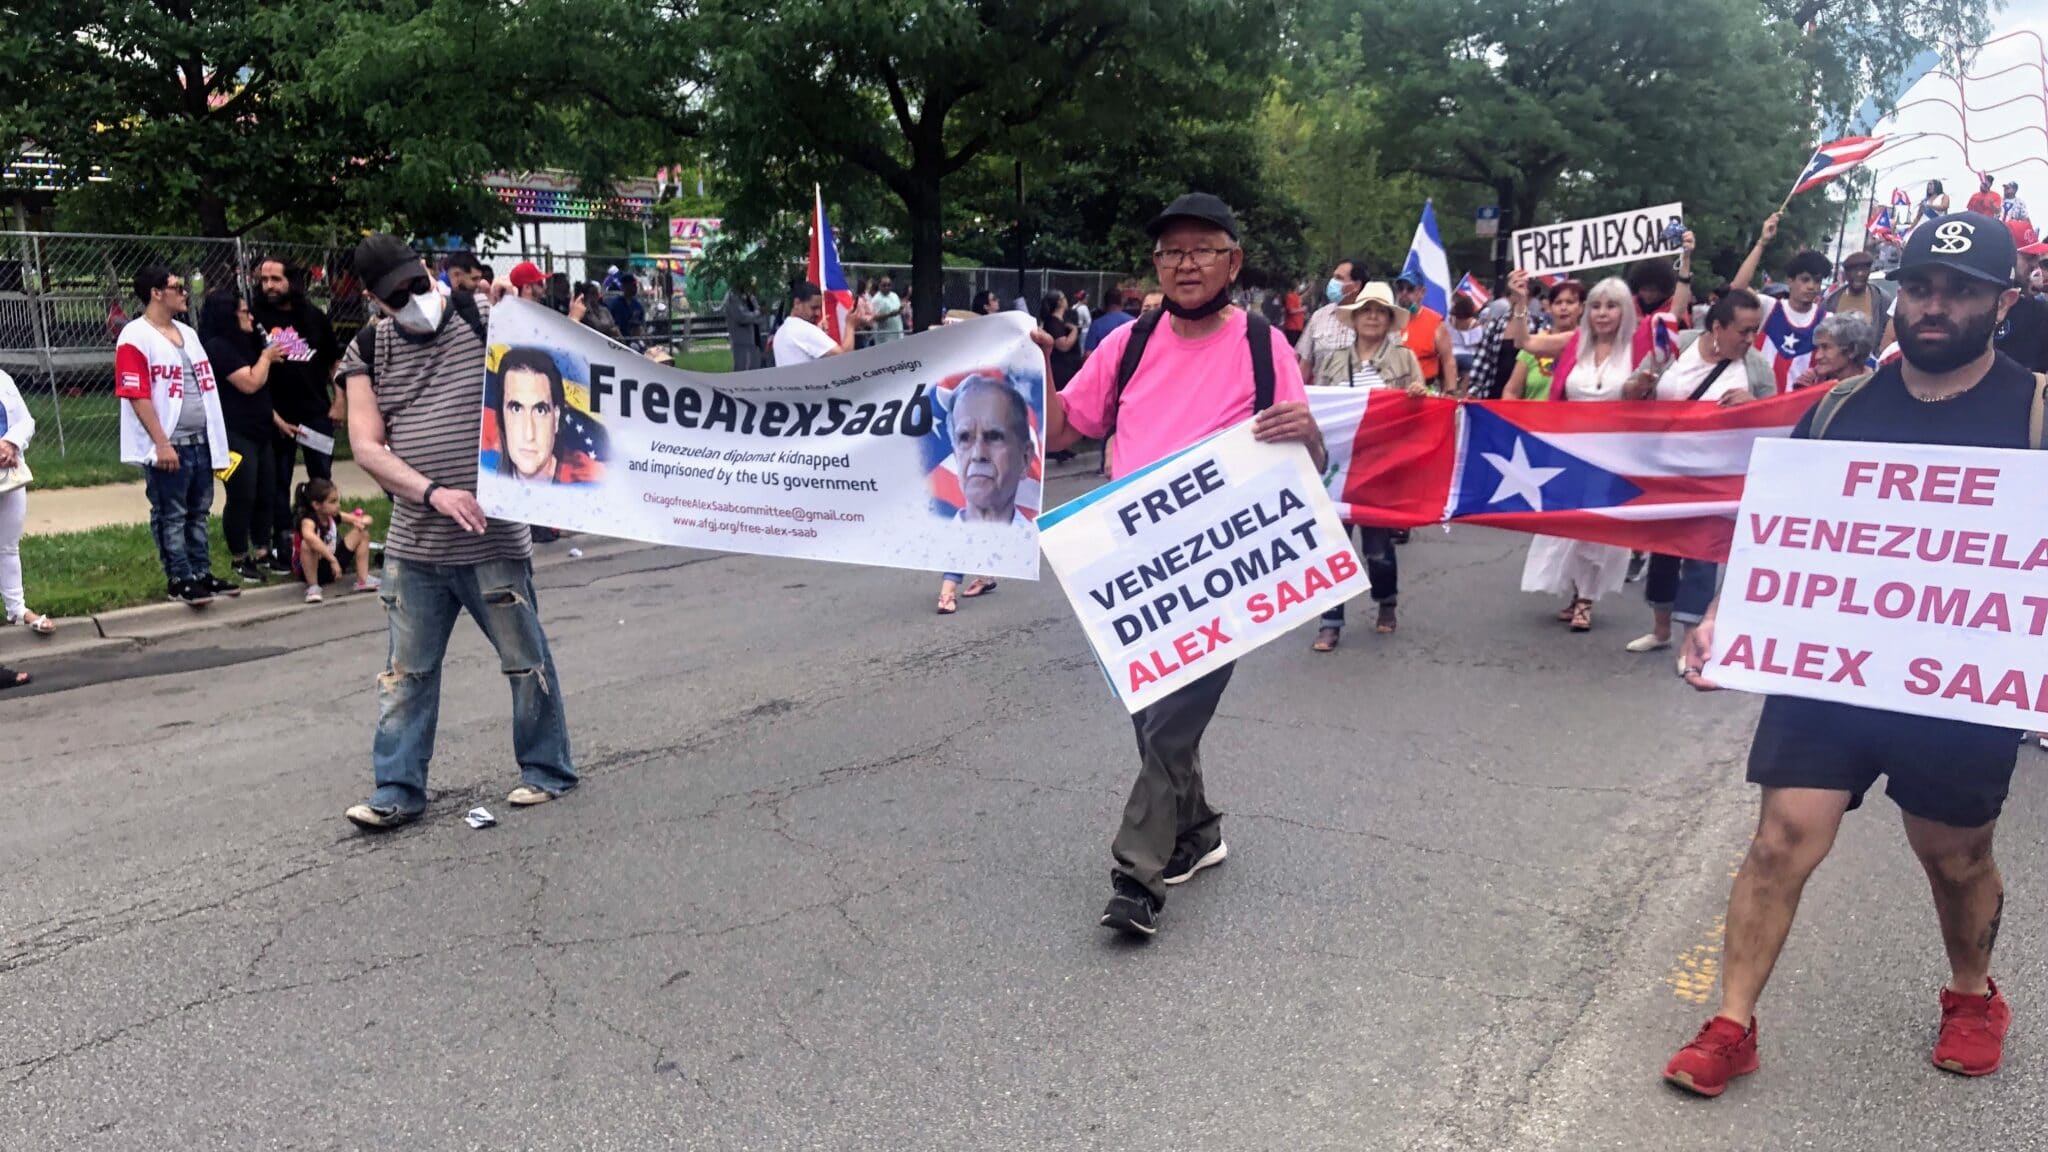 Chicago Free Alex Saab Committee contingent participating in the Puerto Rican People's Parade in Chicago, Saturday, June 11, 2022. Photos: Chicago Free Alex Saab Committee.